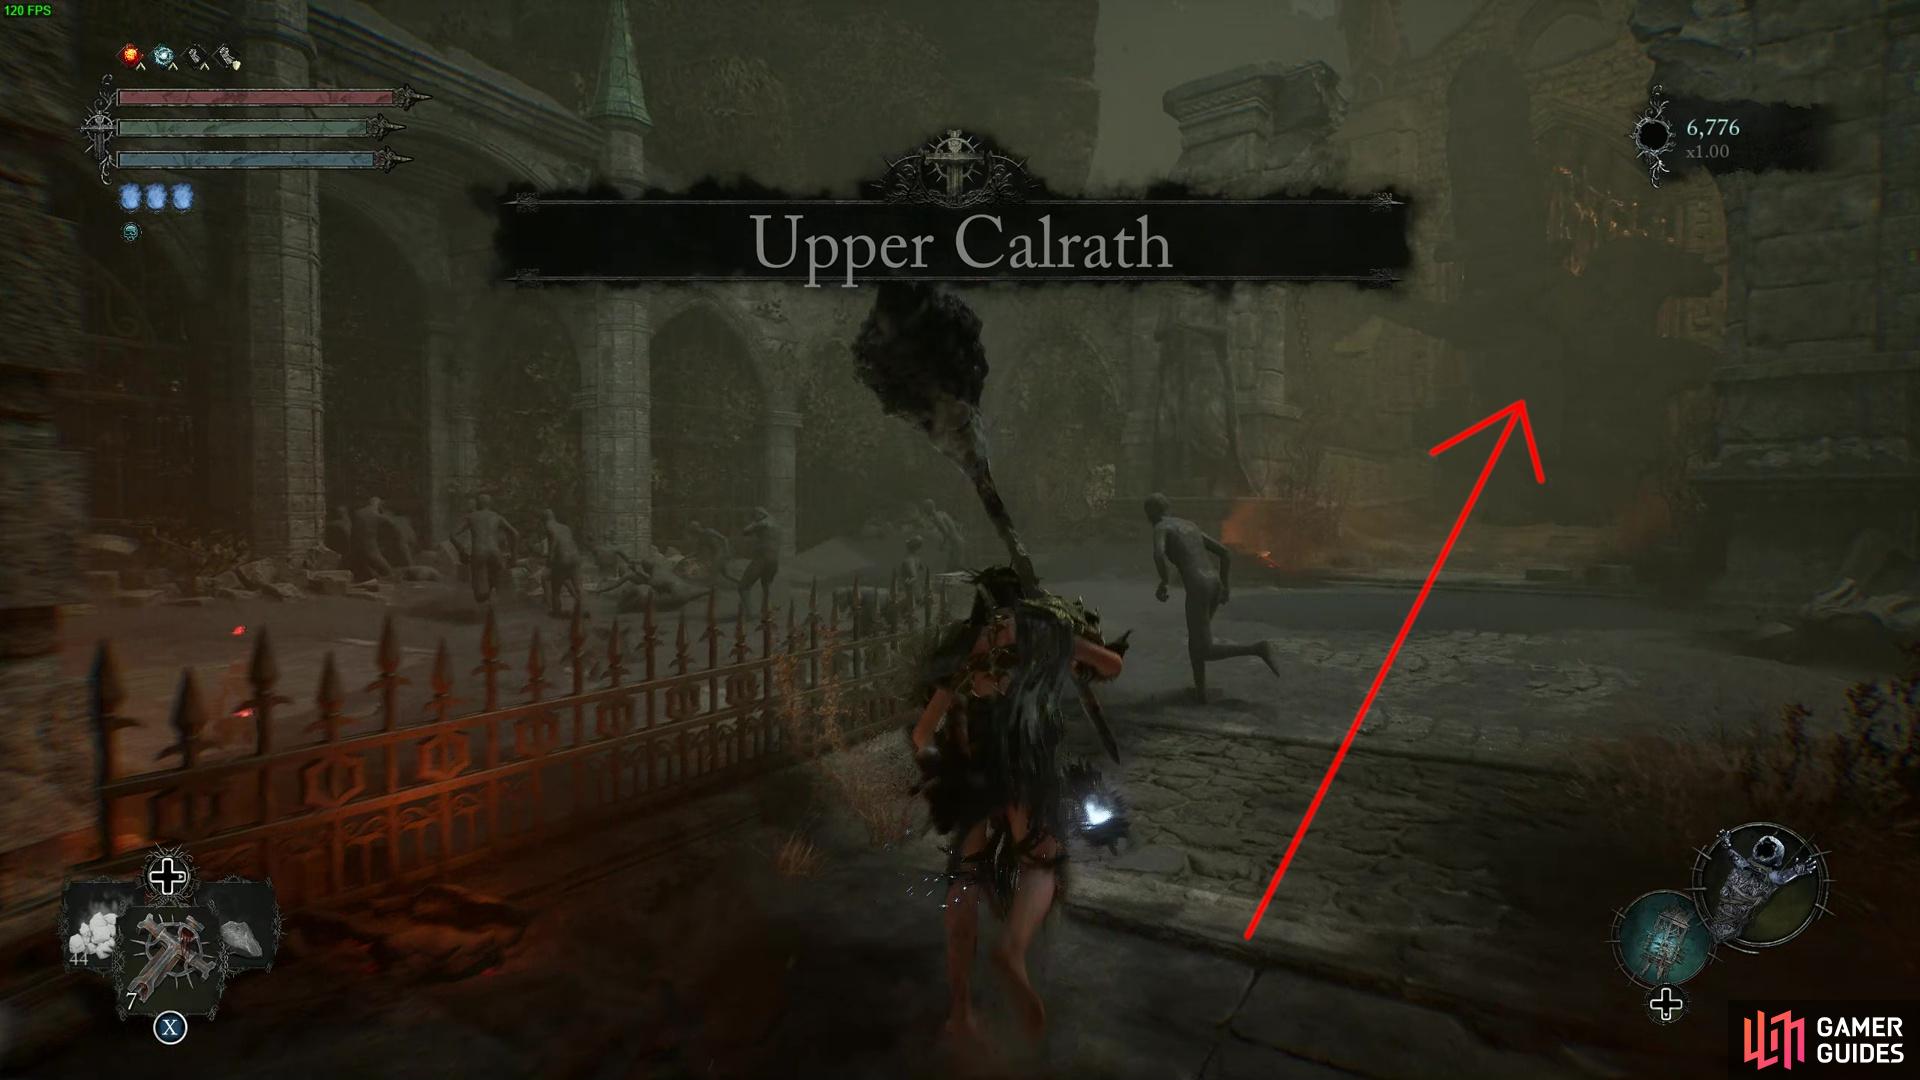 Once all five are done, complete Upper Calrath and battle a boss, then move towards this door opposite the Upper City Calrath Vestige room, and then interact with it.